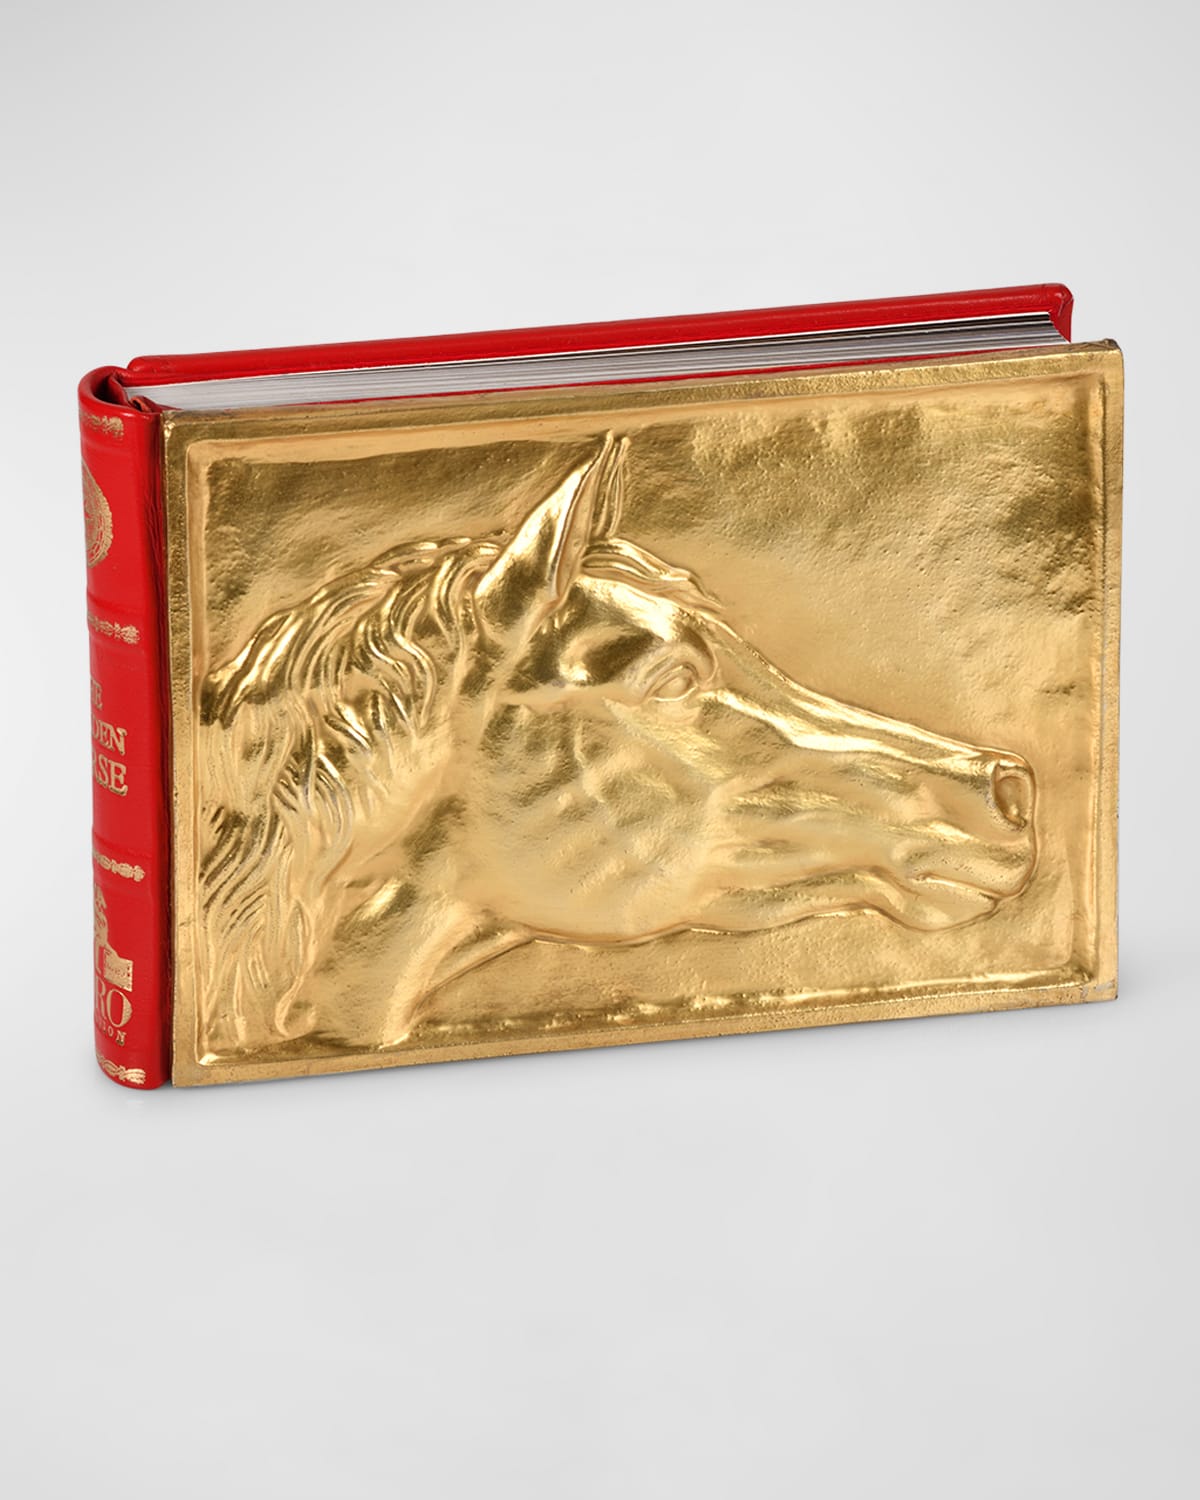 "The Golden Horses (Jewel Edition)" Limited Edition Book with Gold Sculpture Cover